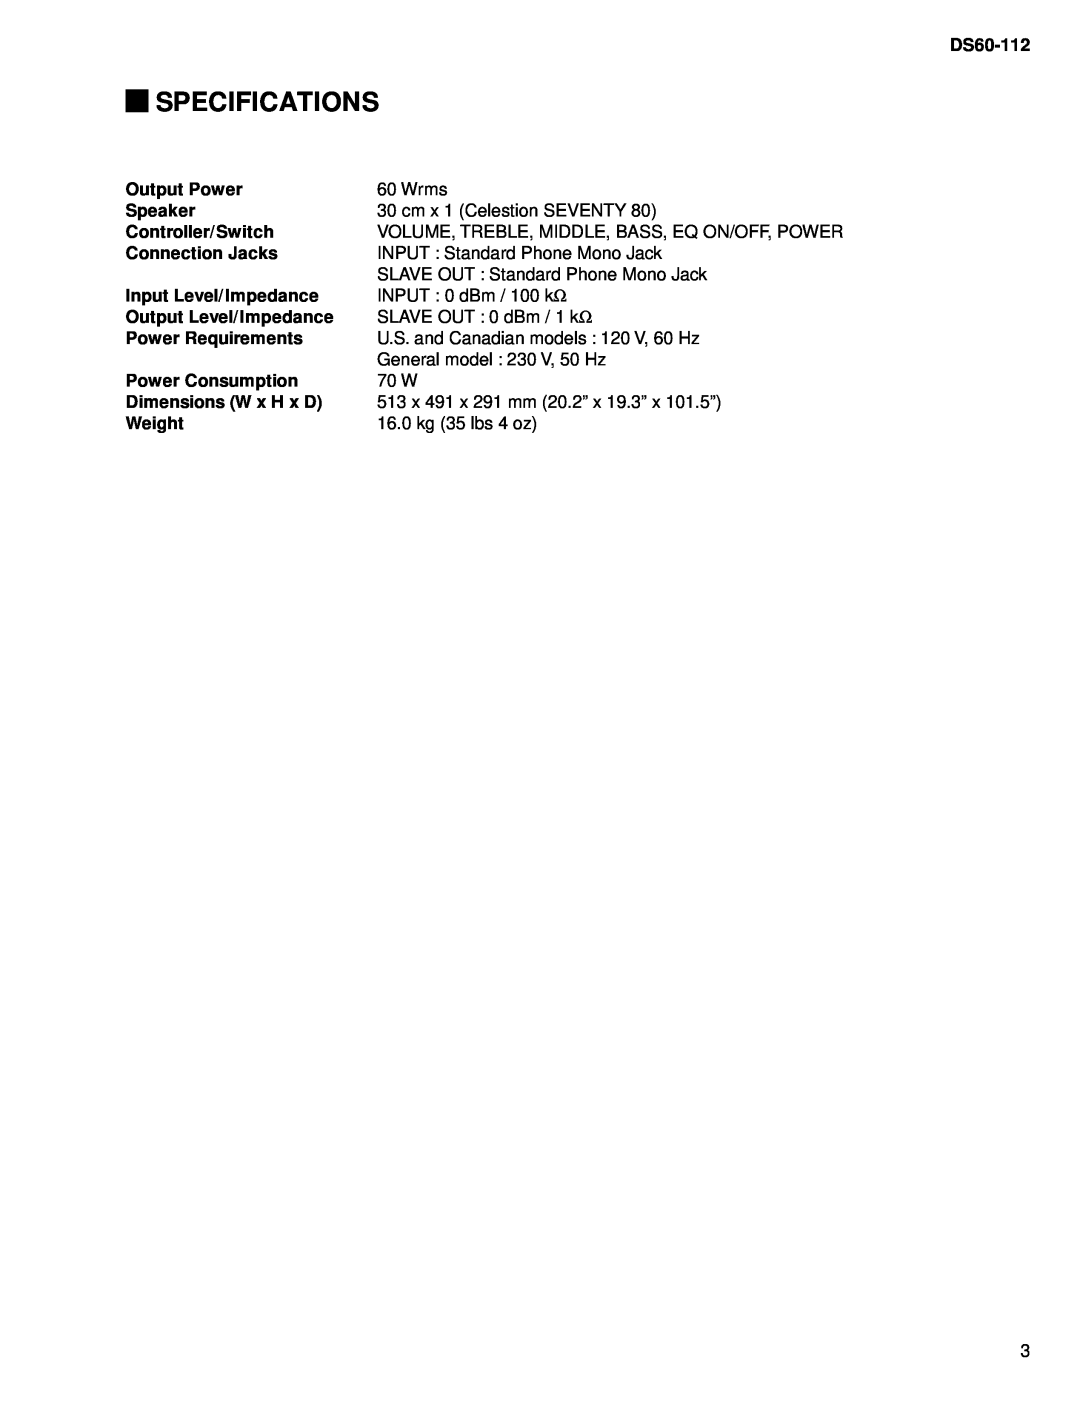 Yamaha DS60-112 service manual Specifications 